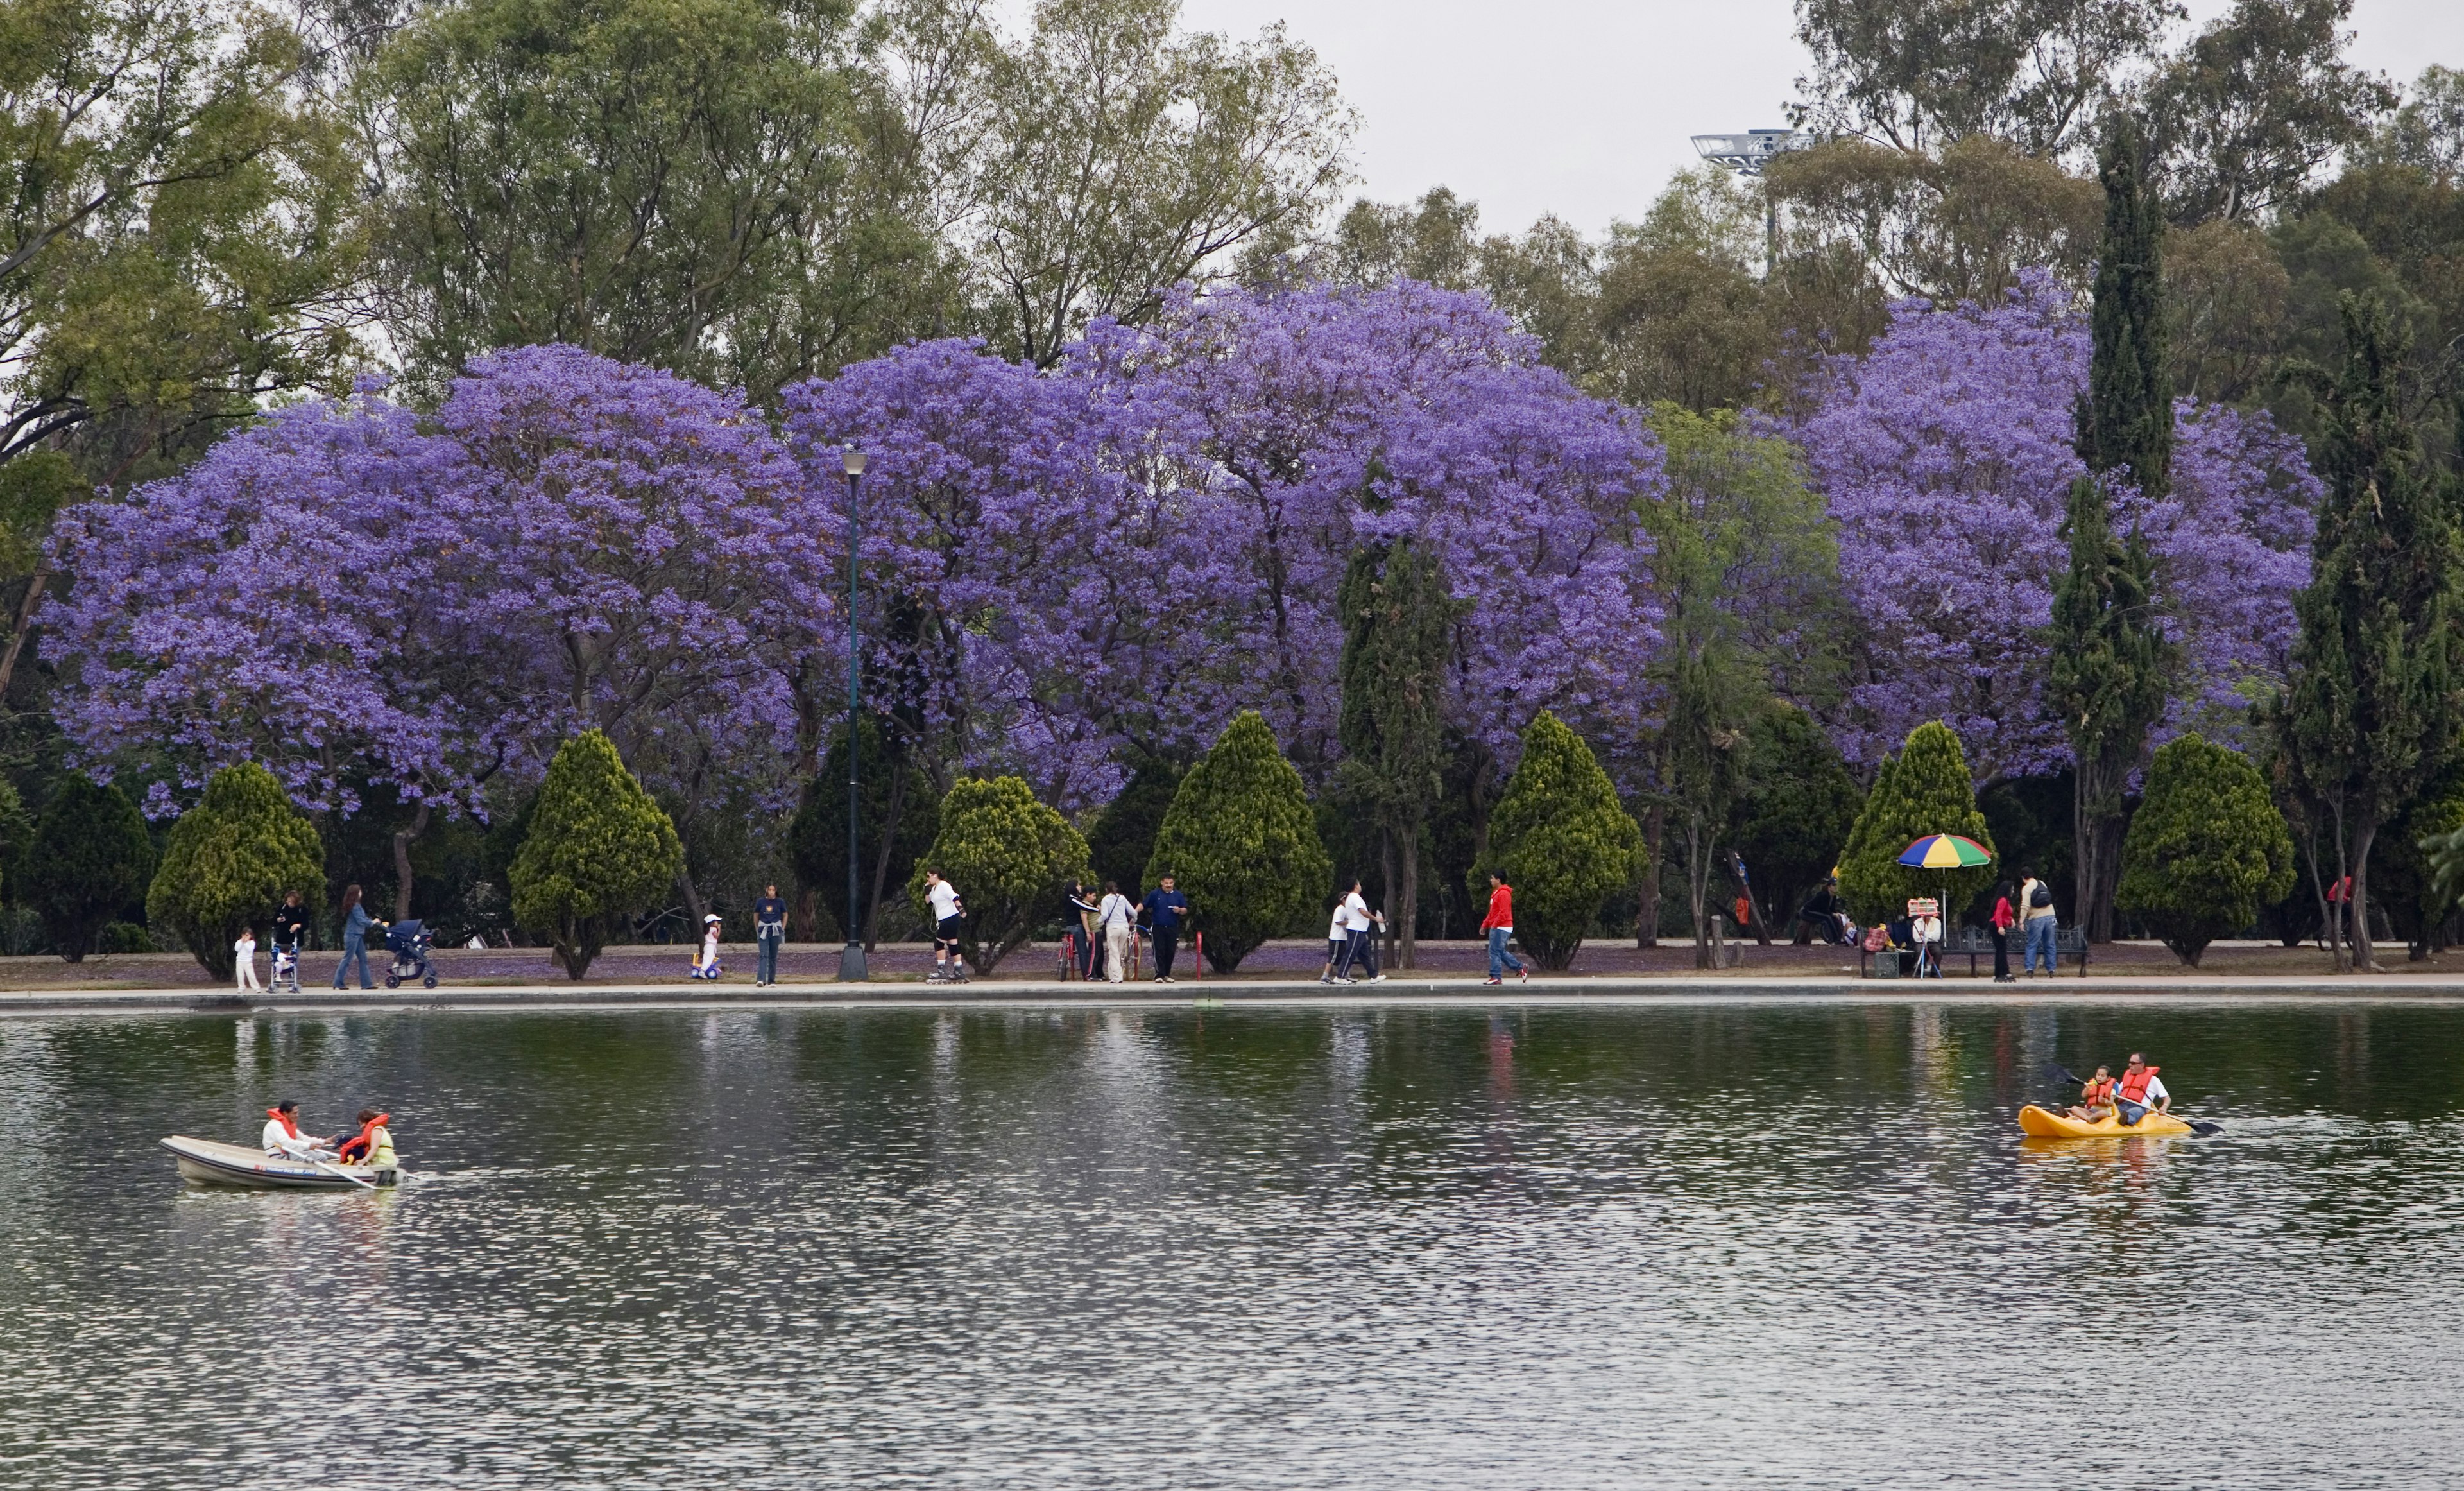 Paddle boats in front of blooming Jacaranda Trees in Chapultepec Park © Paul Franklin / Getty Images